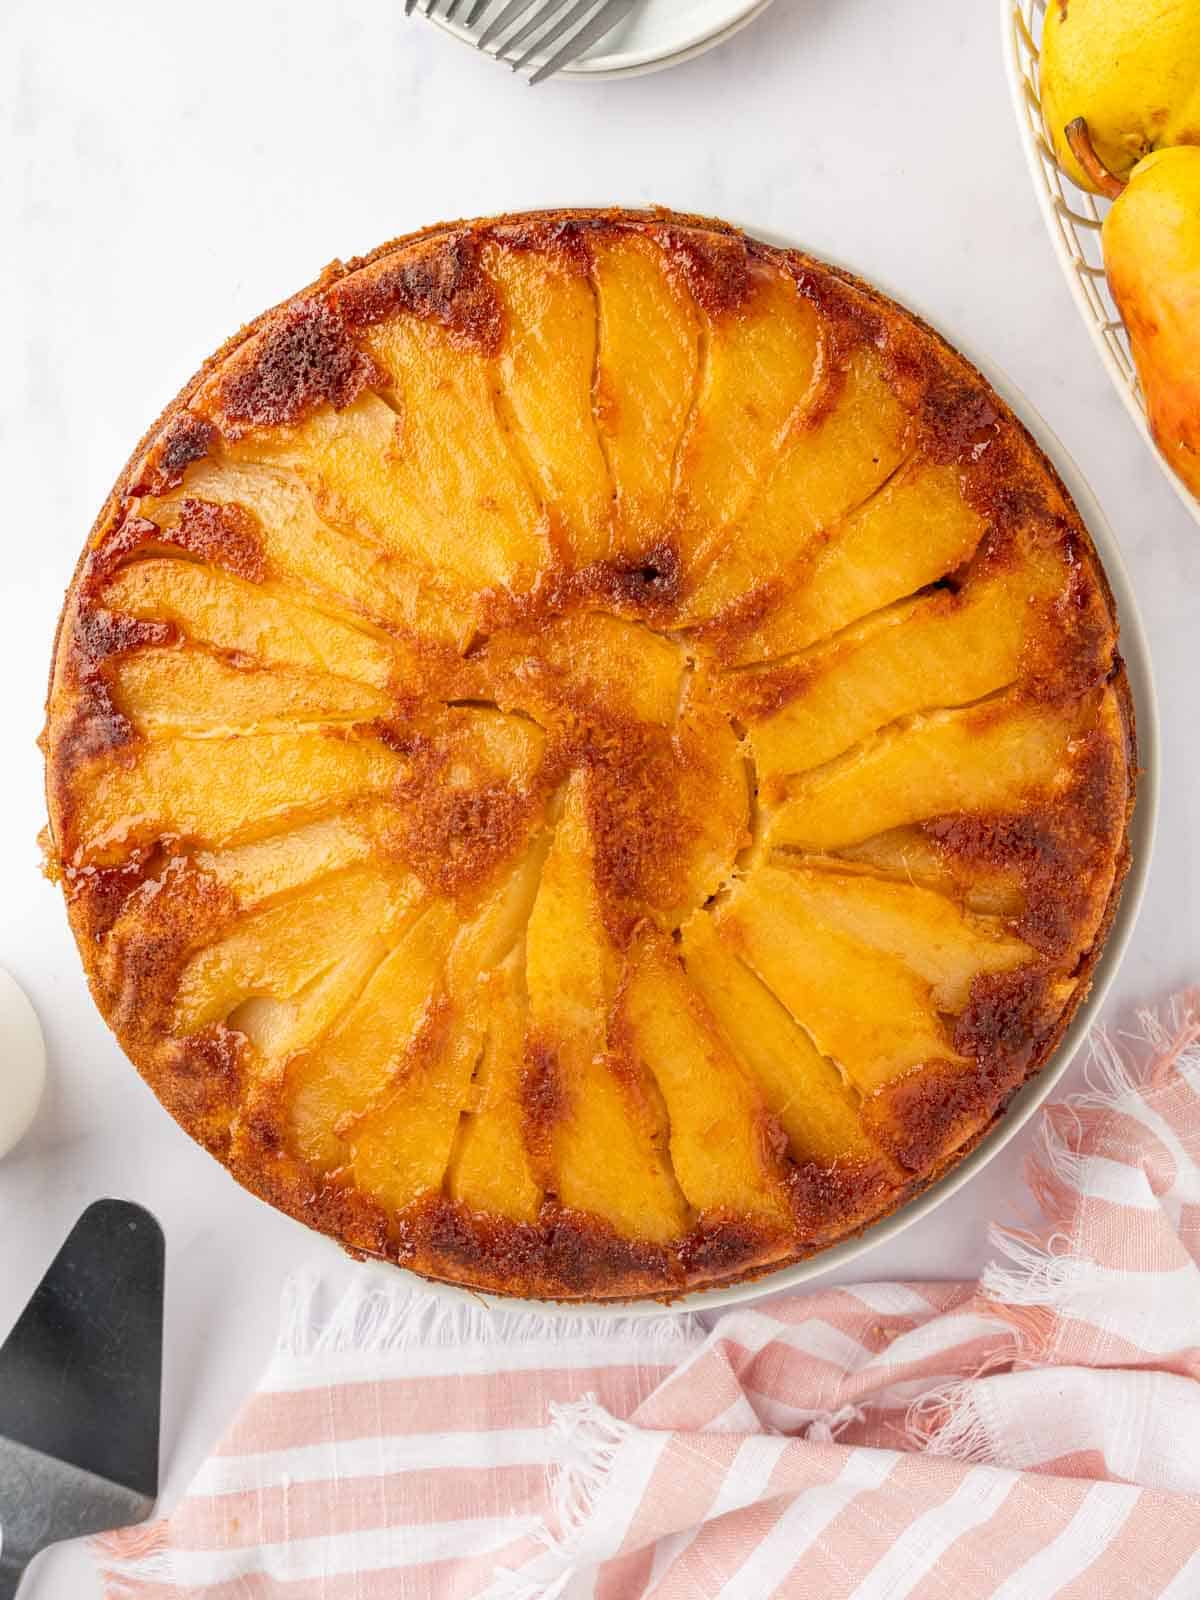 Whole pear upside down cake on a platter.